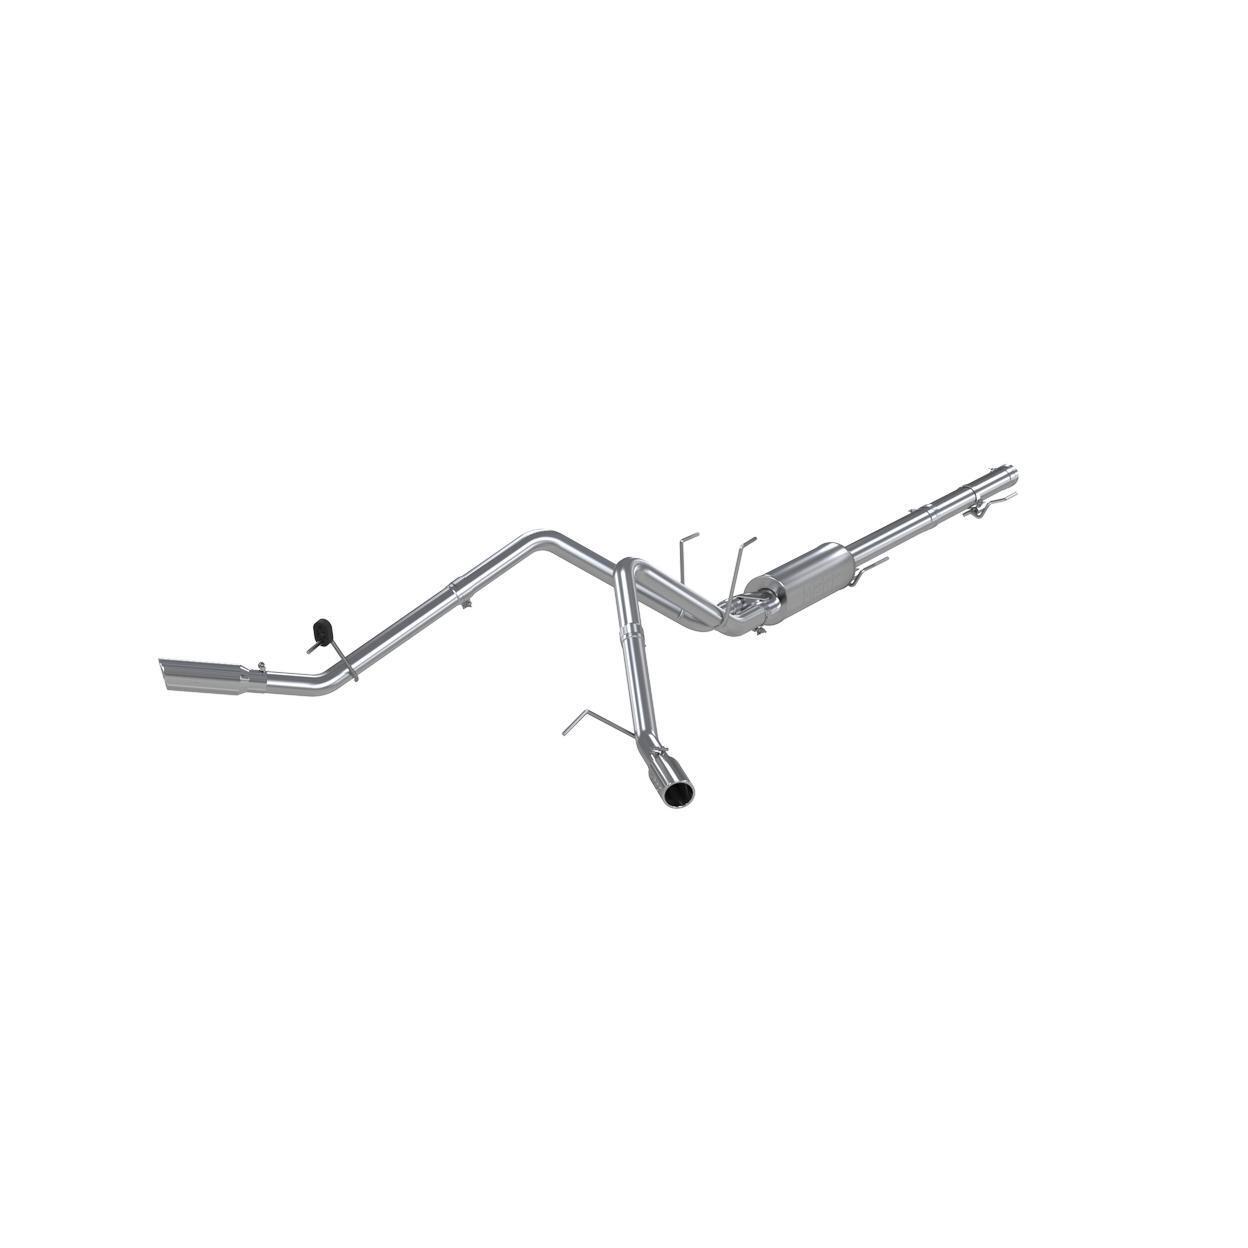 Exhaust System Kit for 2018 Ram 1500